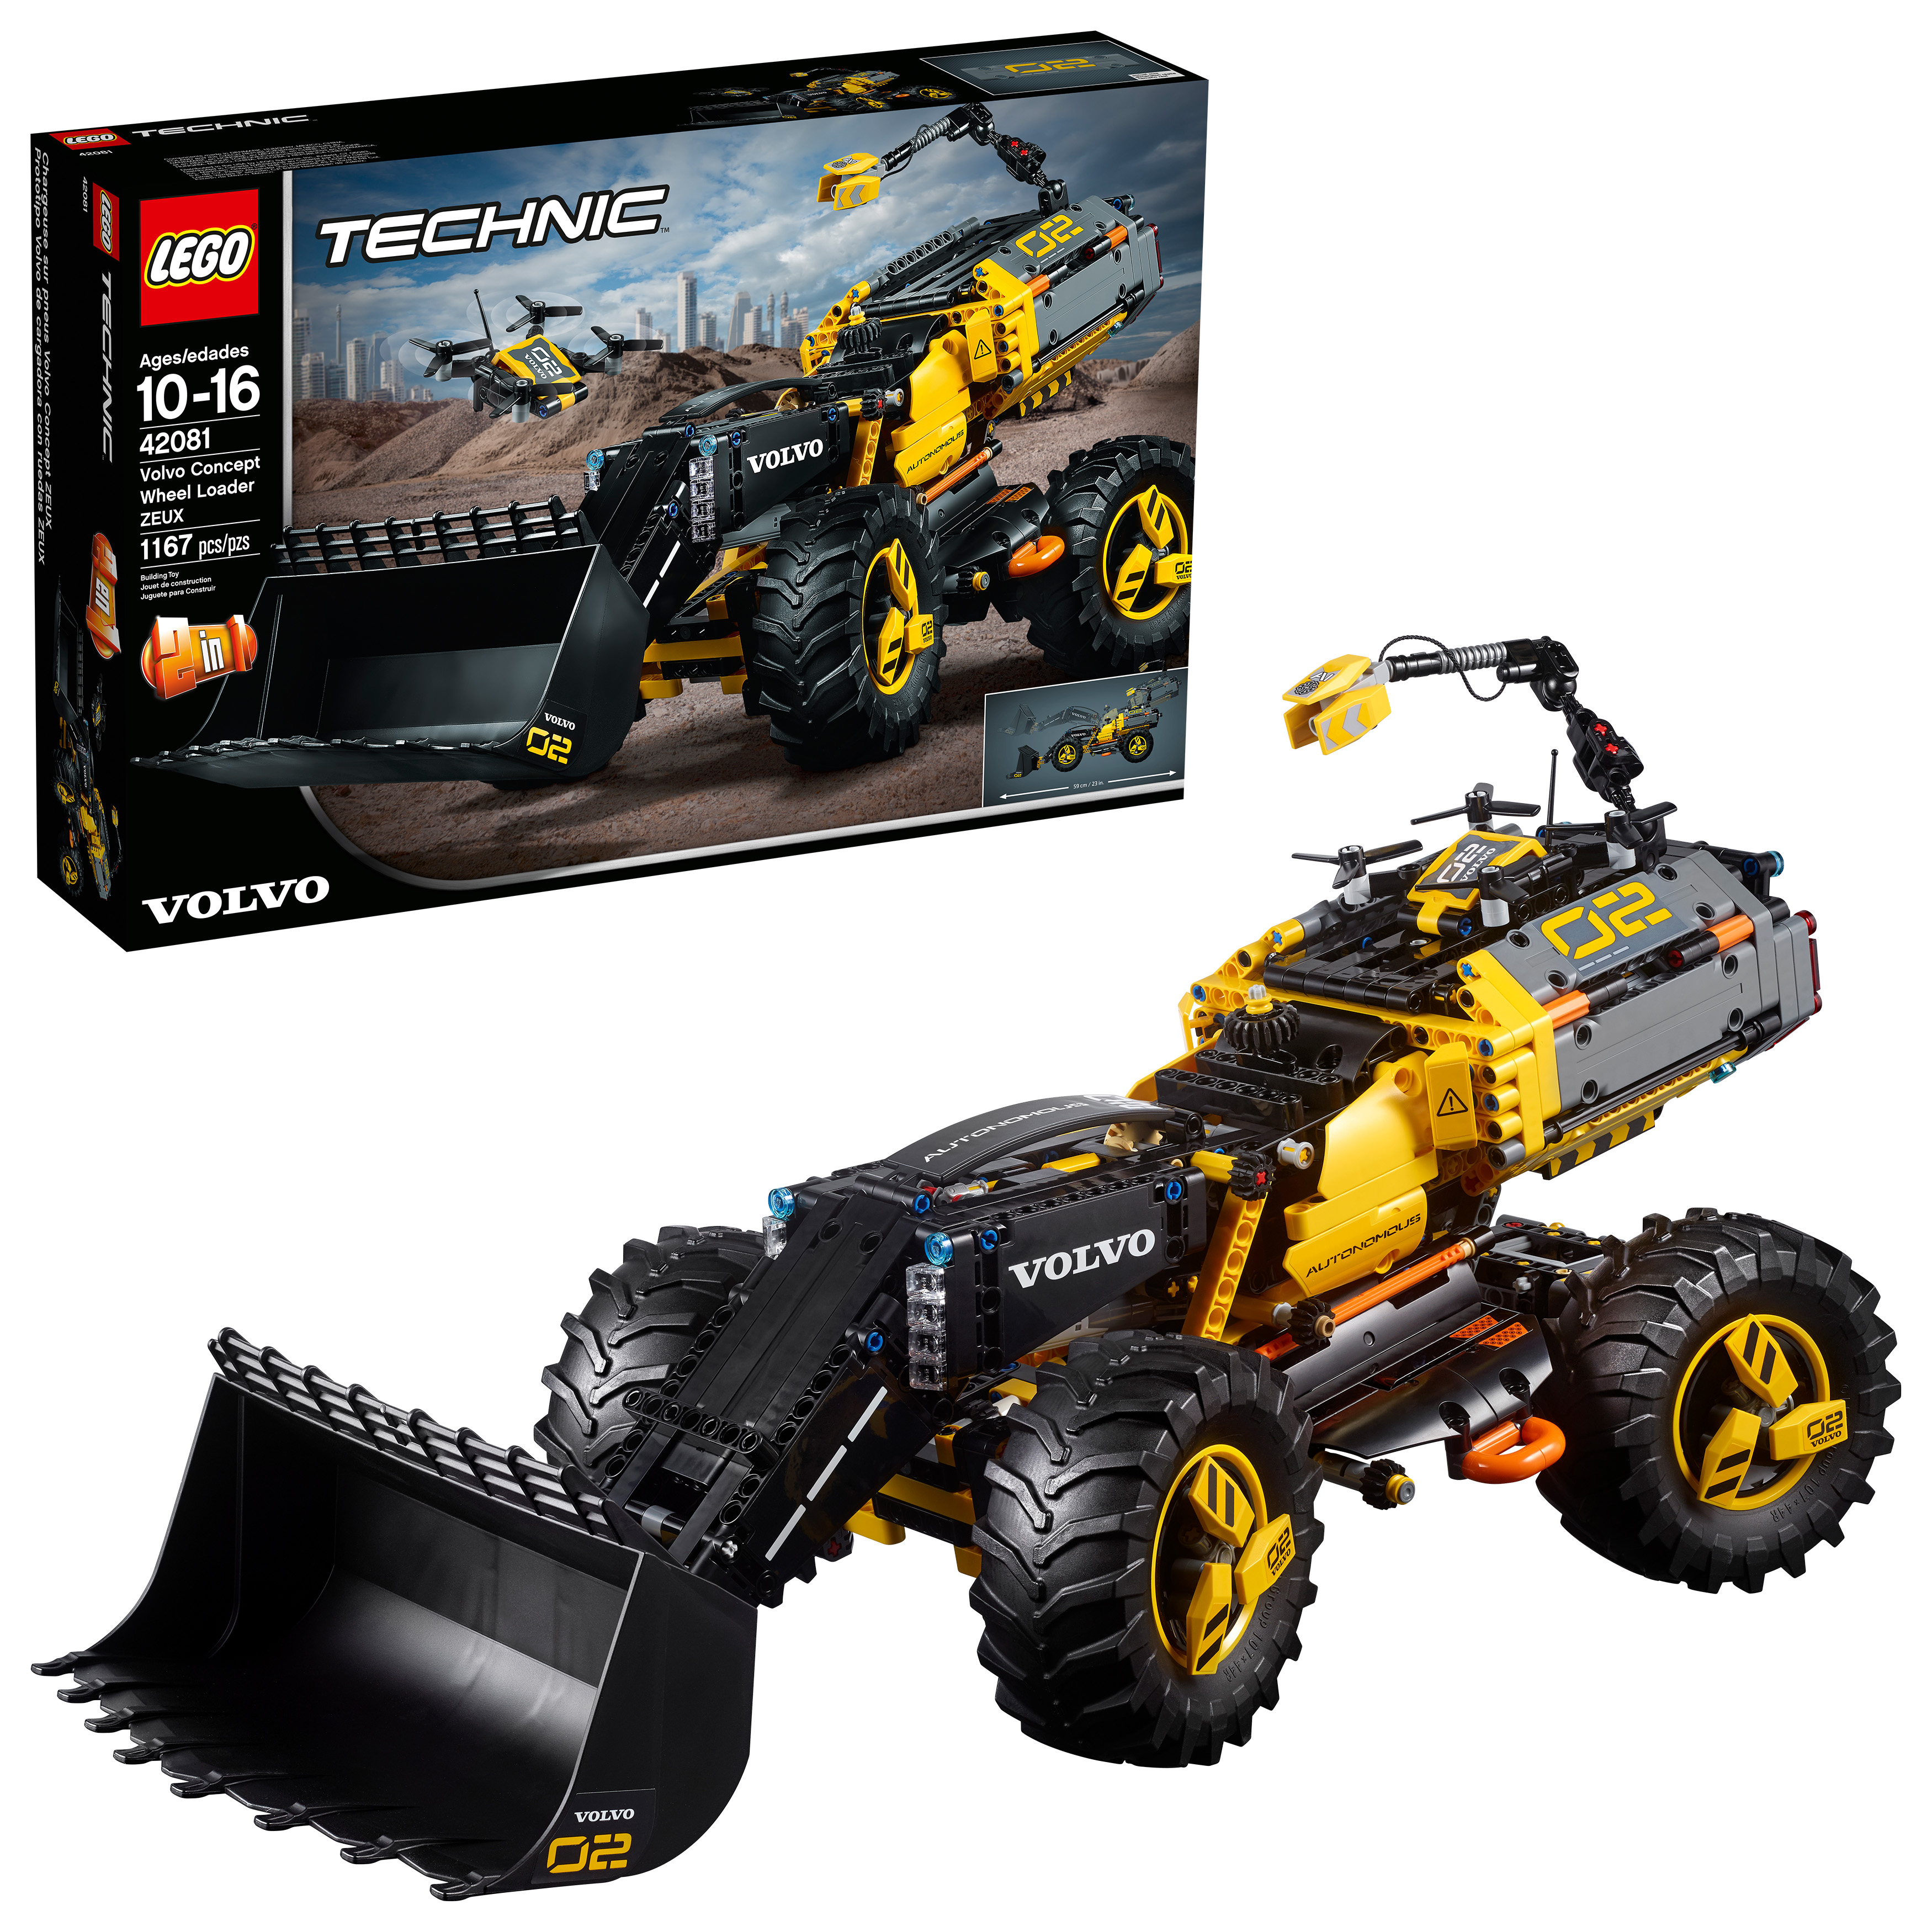 LEGO Technic Volvo Concept Wheel Loader ZEUX 42081 - image 1 of 7